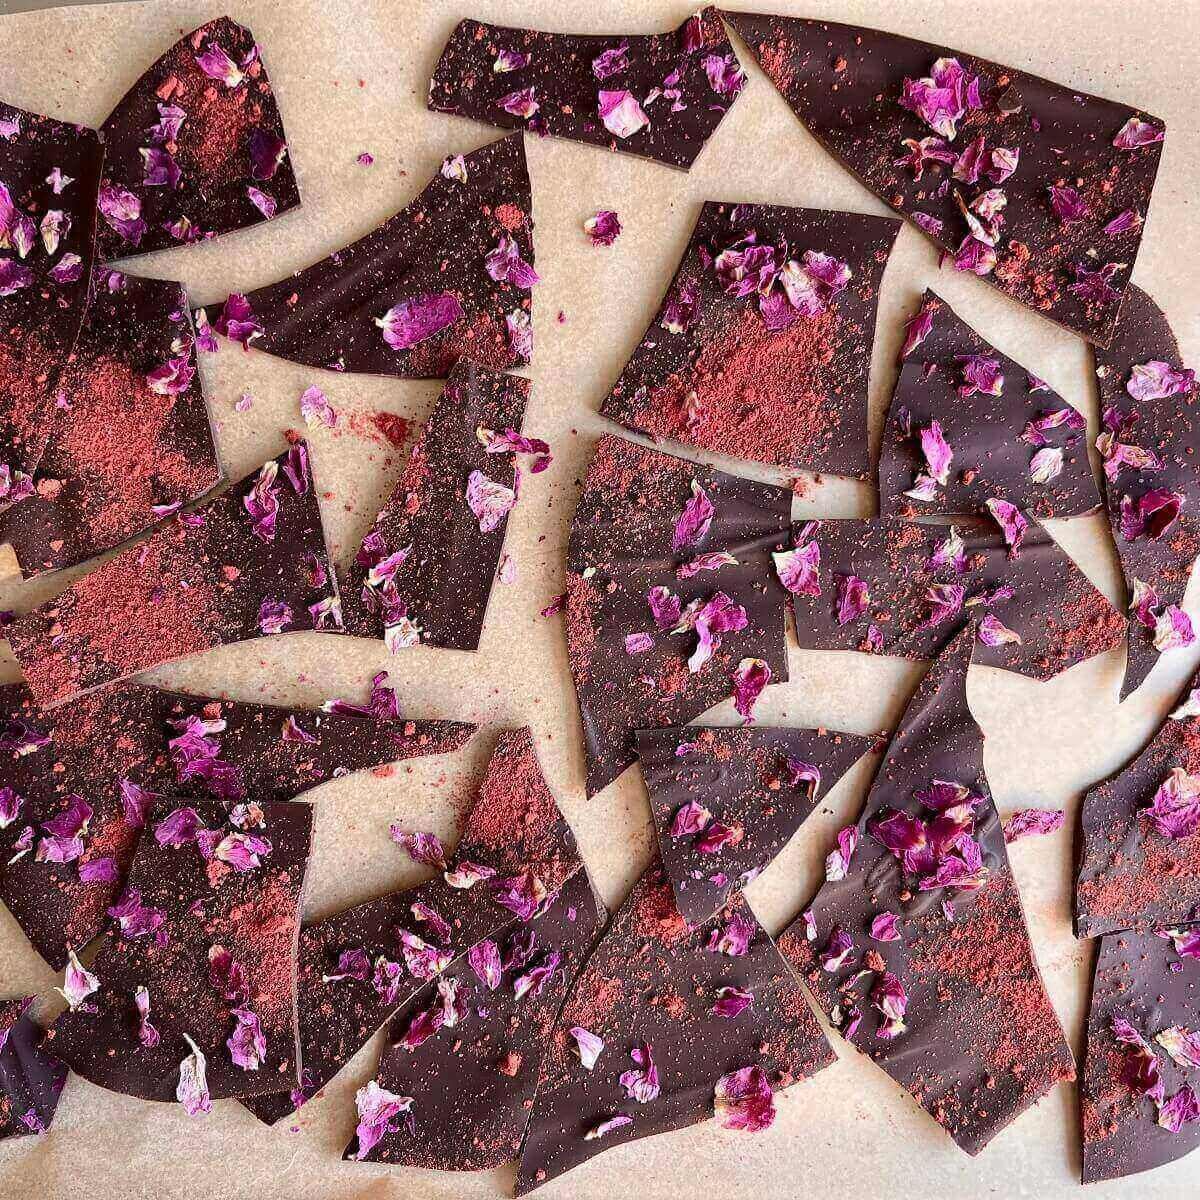 Shards of chocolate bark on a sheet pan lined with parchment paper.